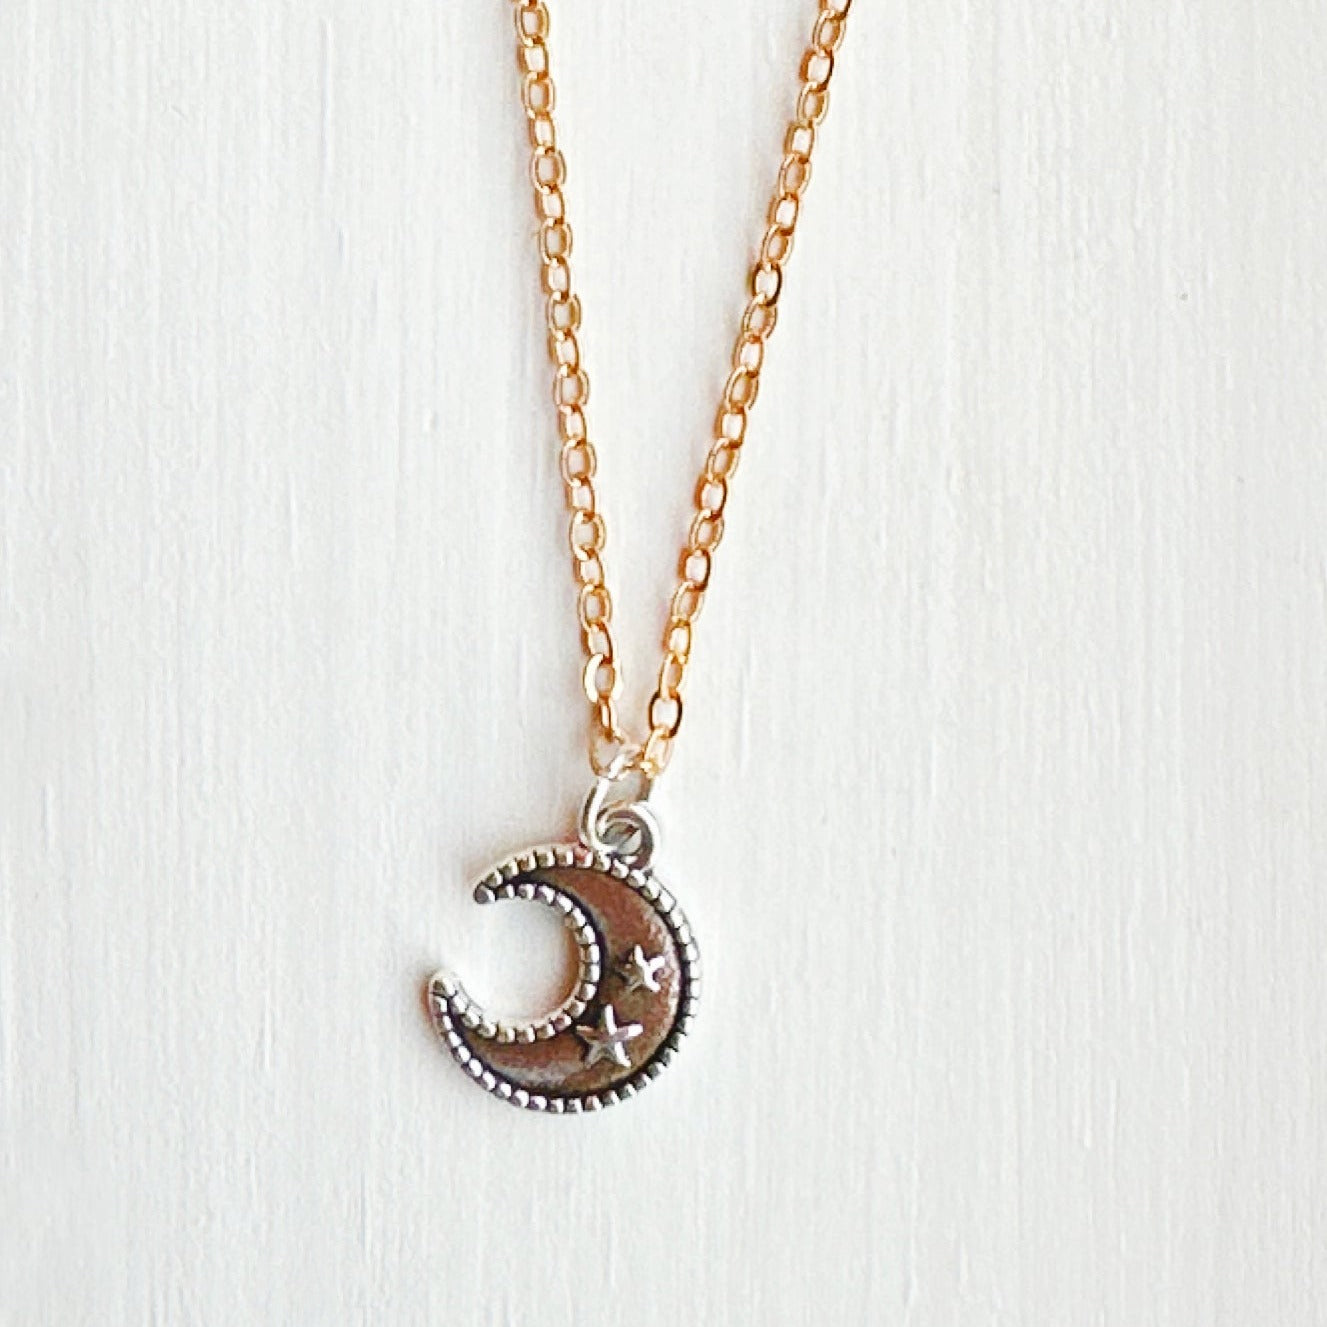 Stars on the Crescent Moon Pendant Necklace